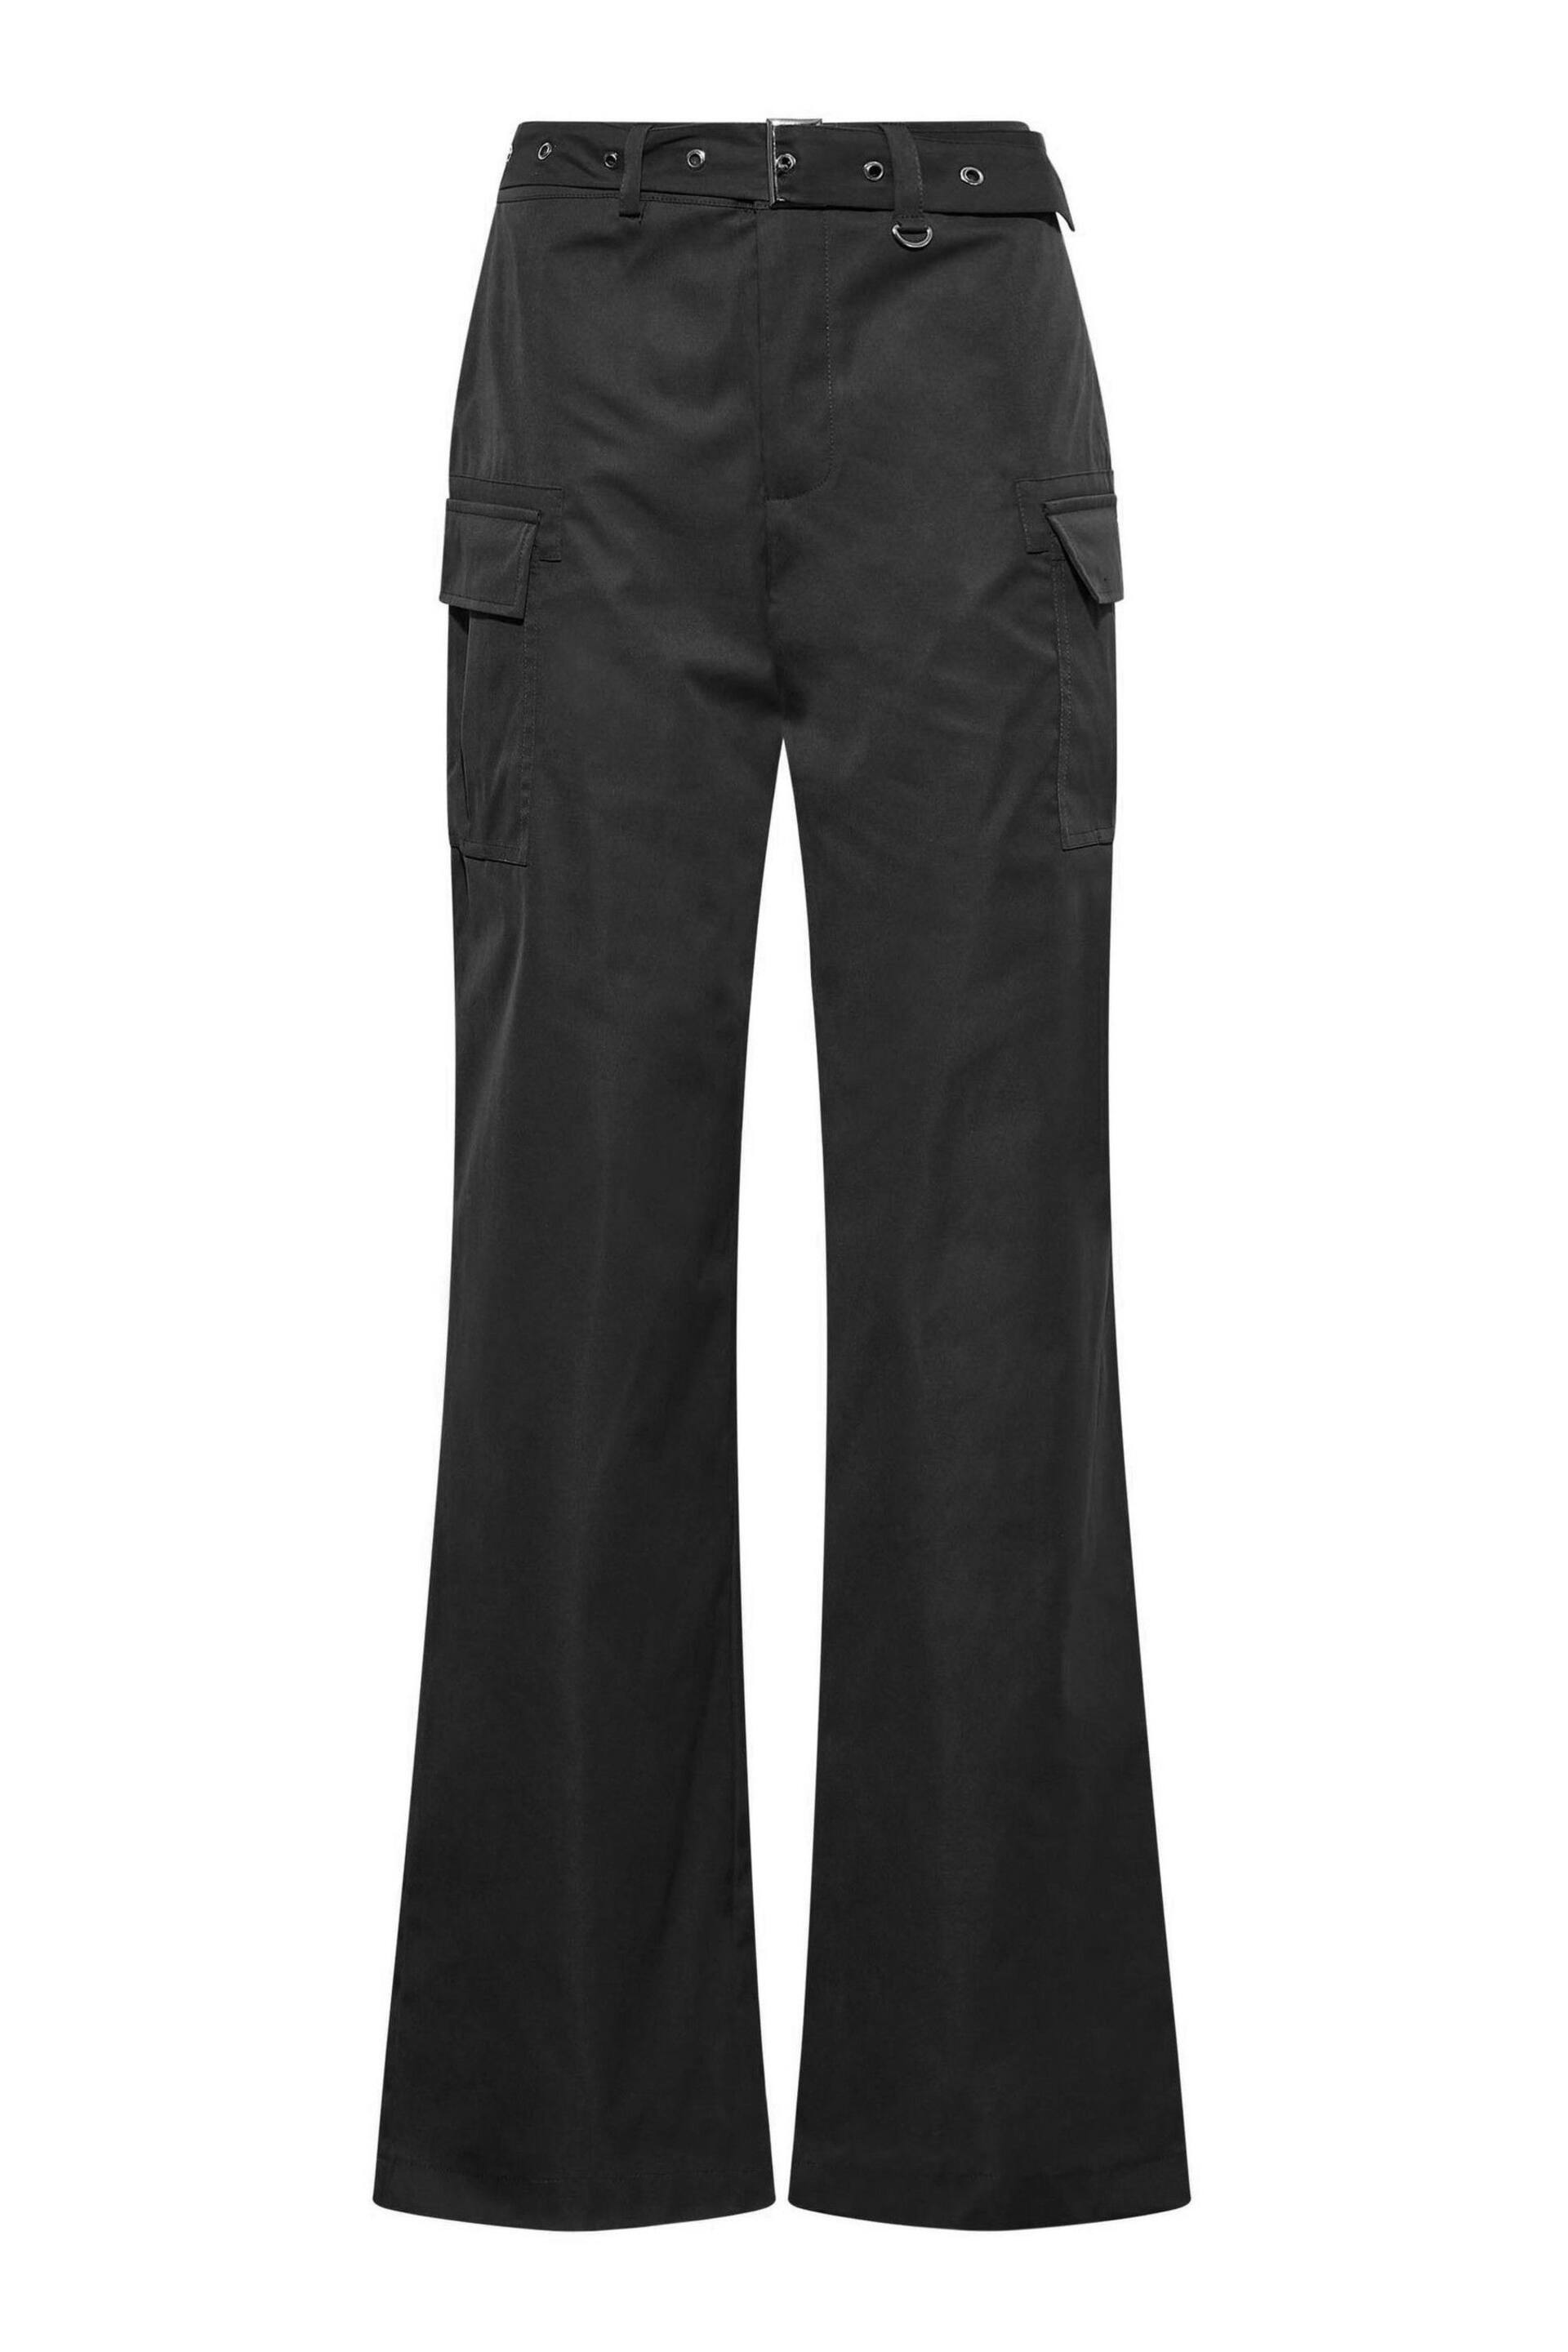 Long Tall Sally Black Belted Wide Leg Cargo Trousers - Image 3 of 4